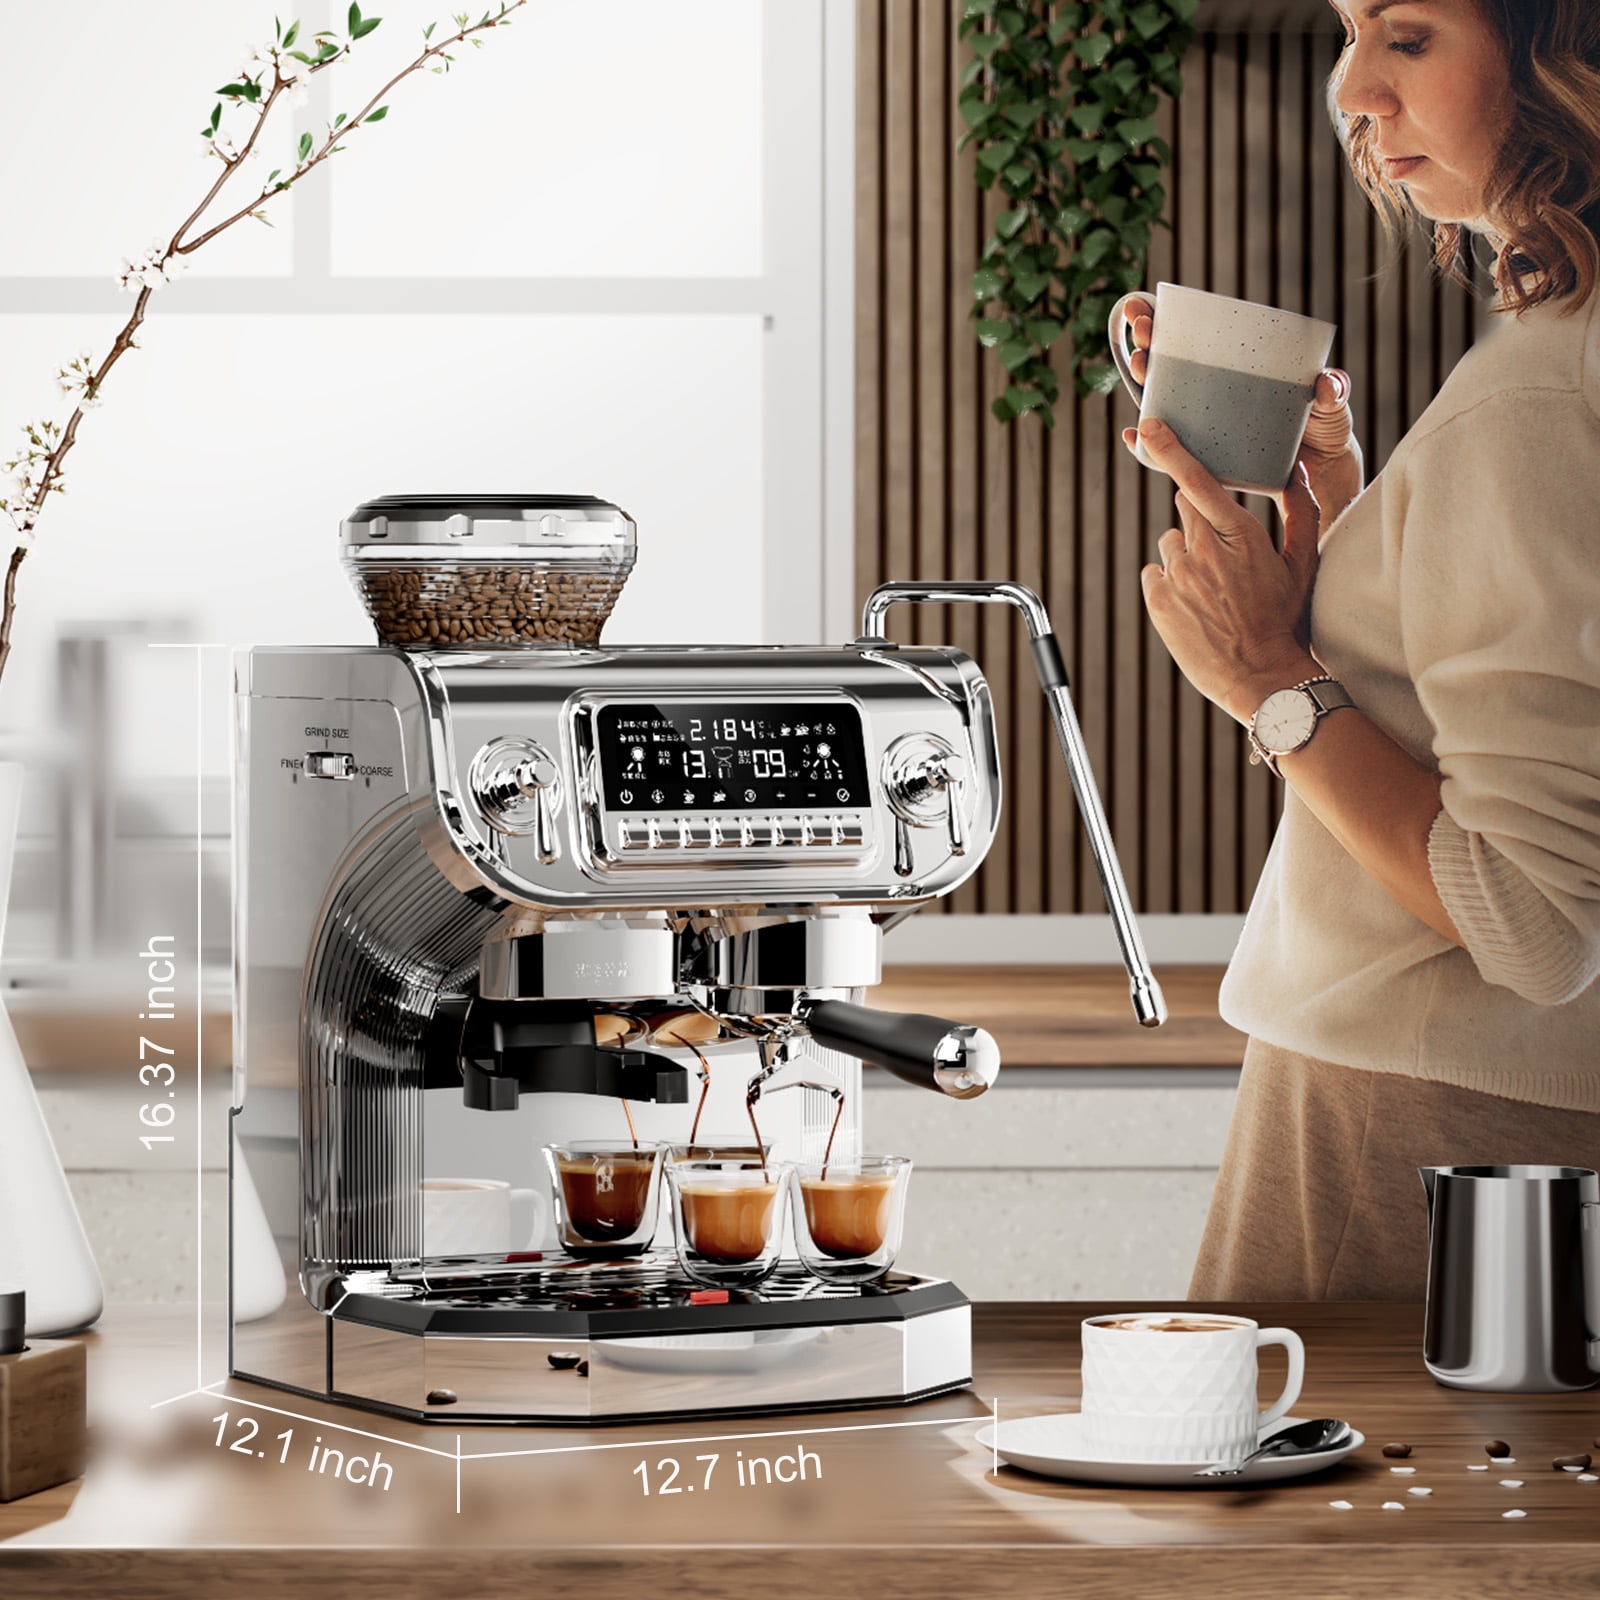 Mcilpoog ES317 Fully Automatic Espresso Machine,Milk Frother,Built-in Grinder,Intuitive Touch Display ,7 Coffee Varieties for Home, Office,and More